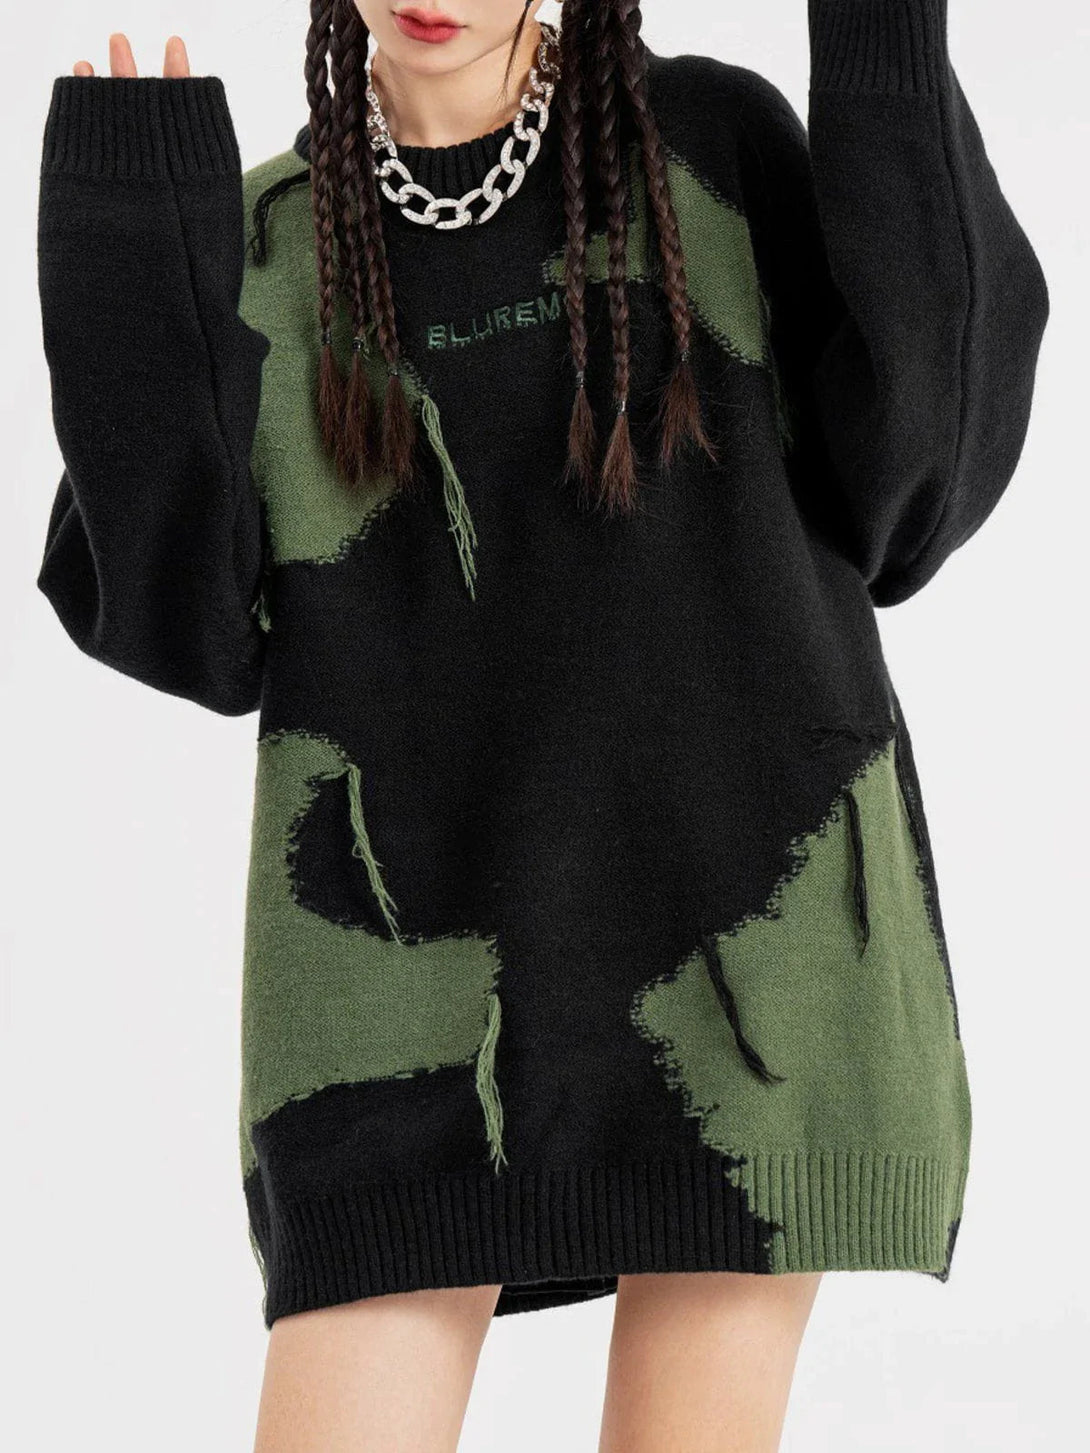 Majesda® - Star Jacquard Fringed Knitted Sweater outfit ideas streetwear fashion